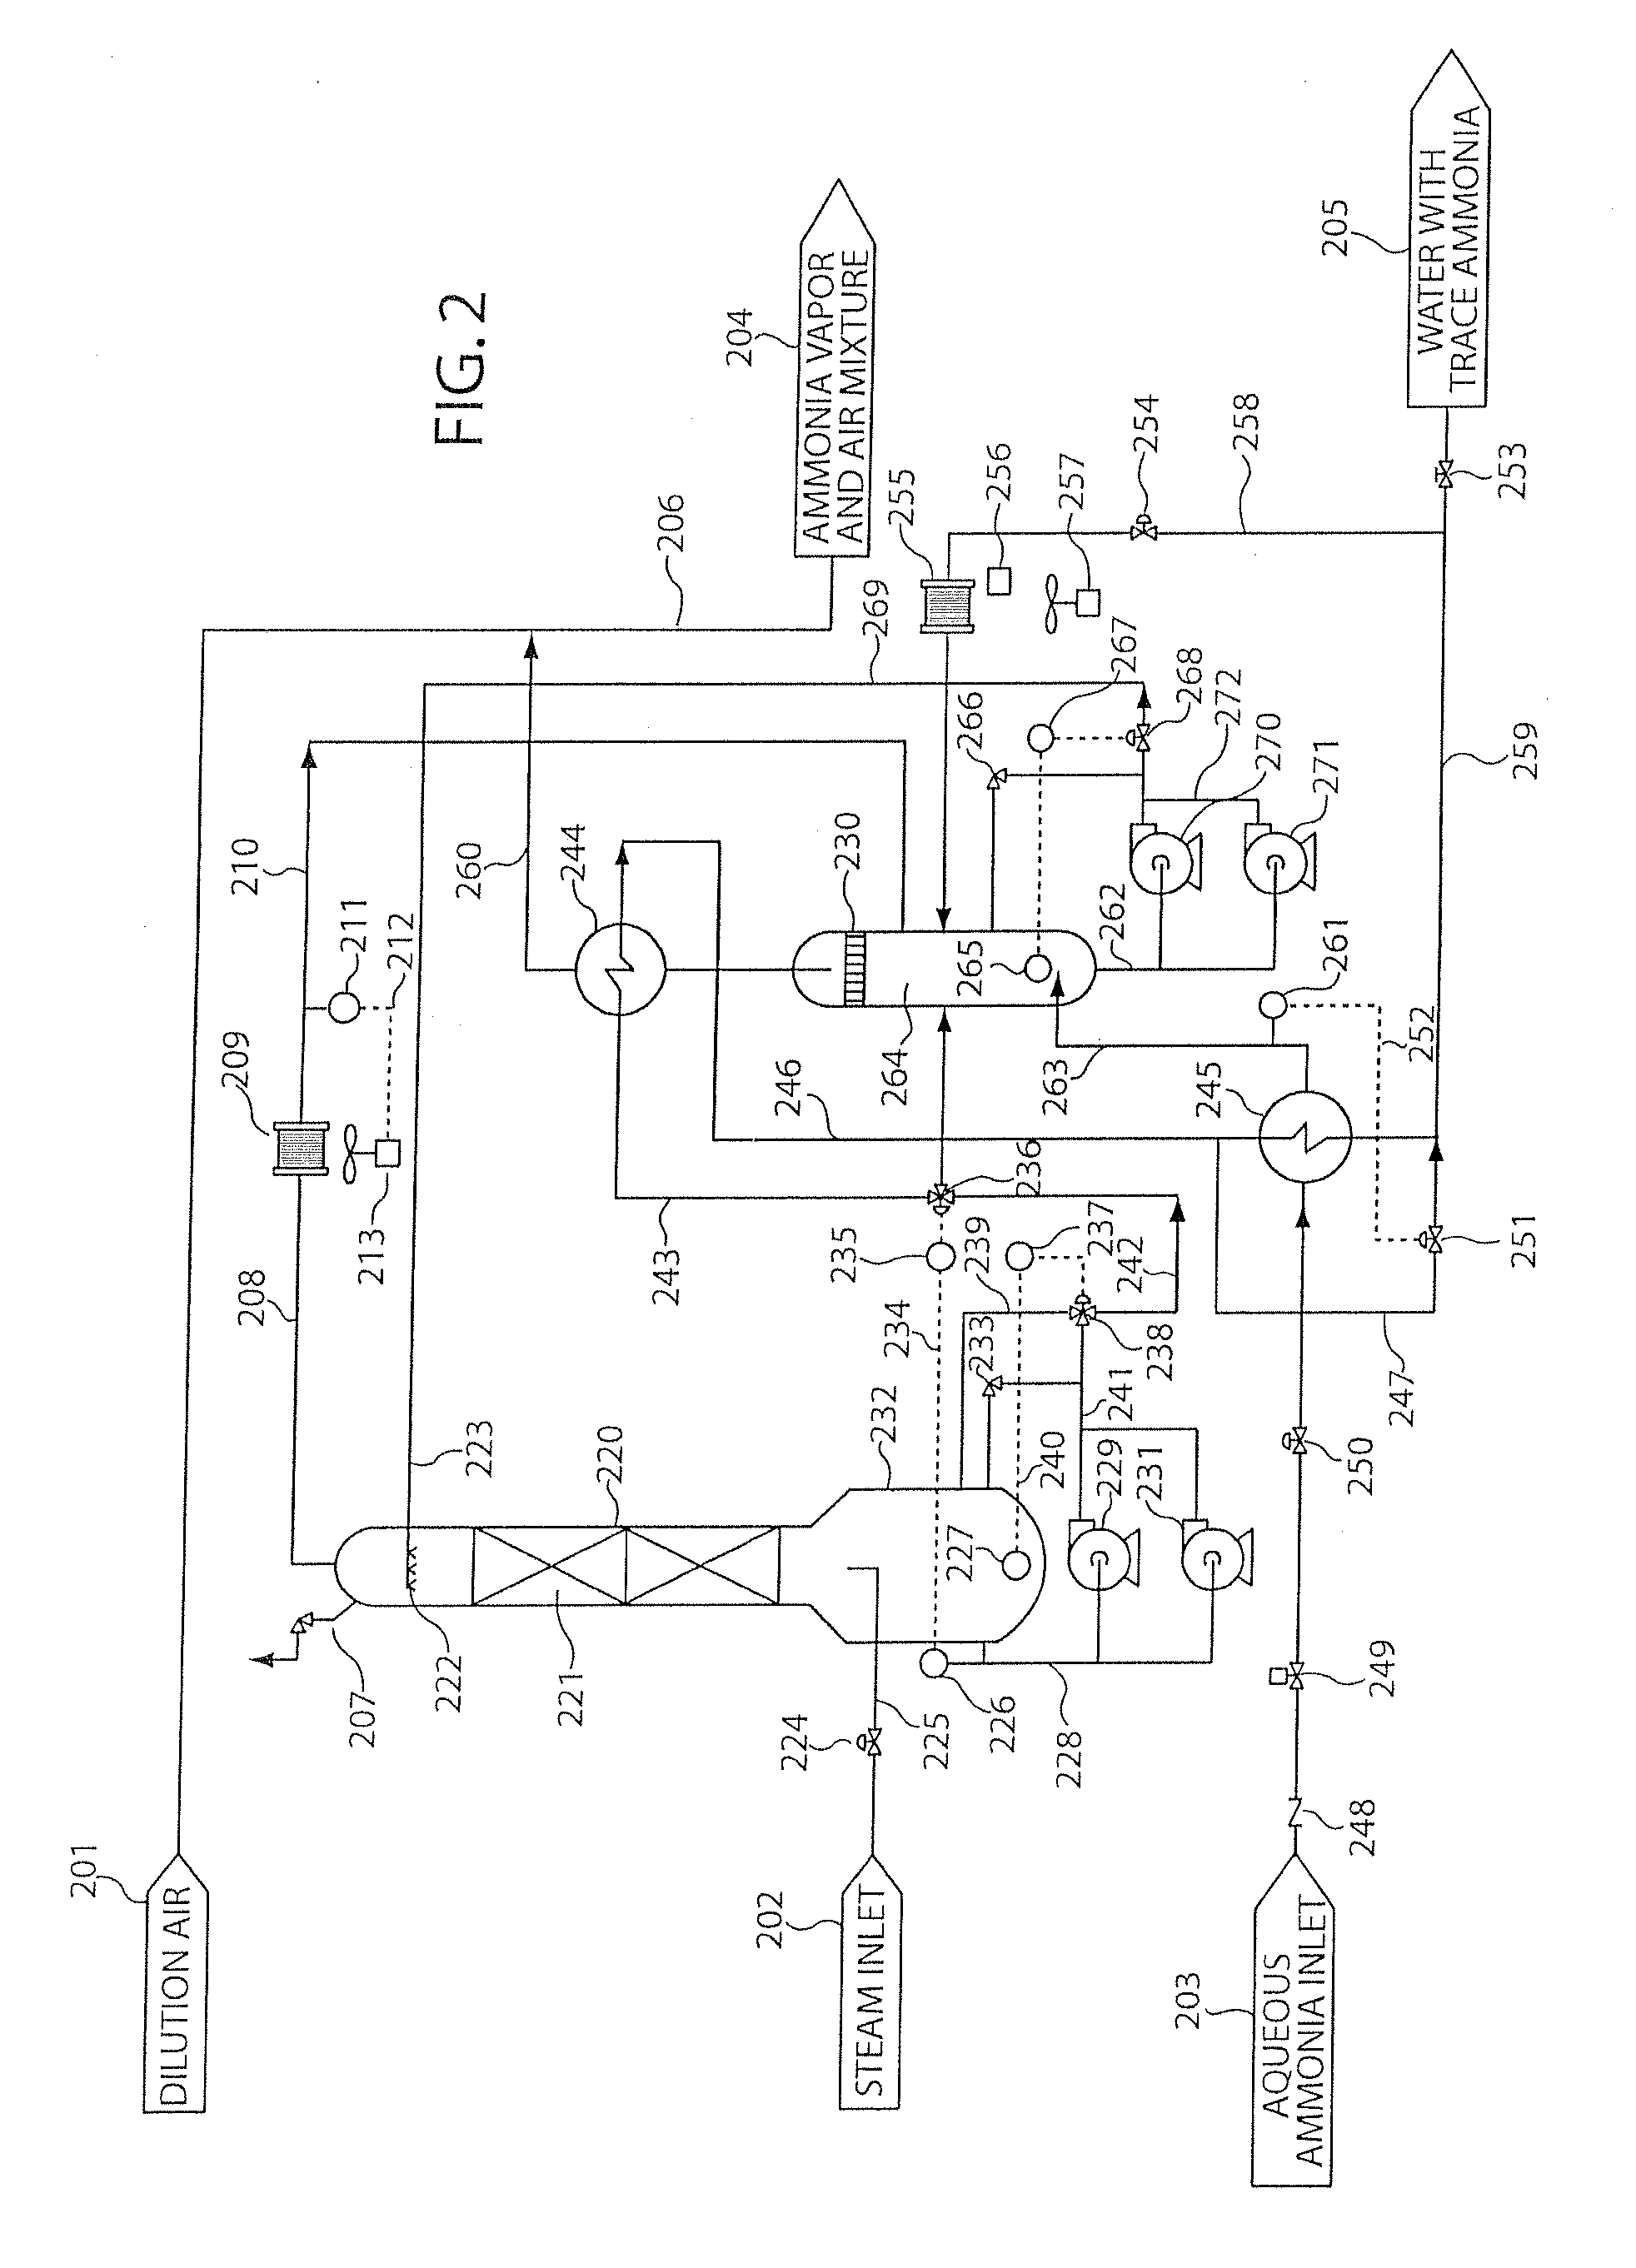 SEPARATION OF AQUEOUS AMMONIA COMPONENTS FOR NOx REDUCTION